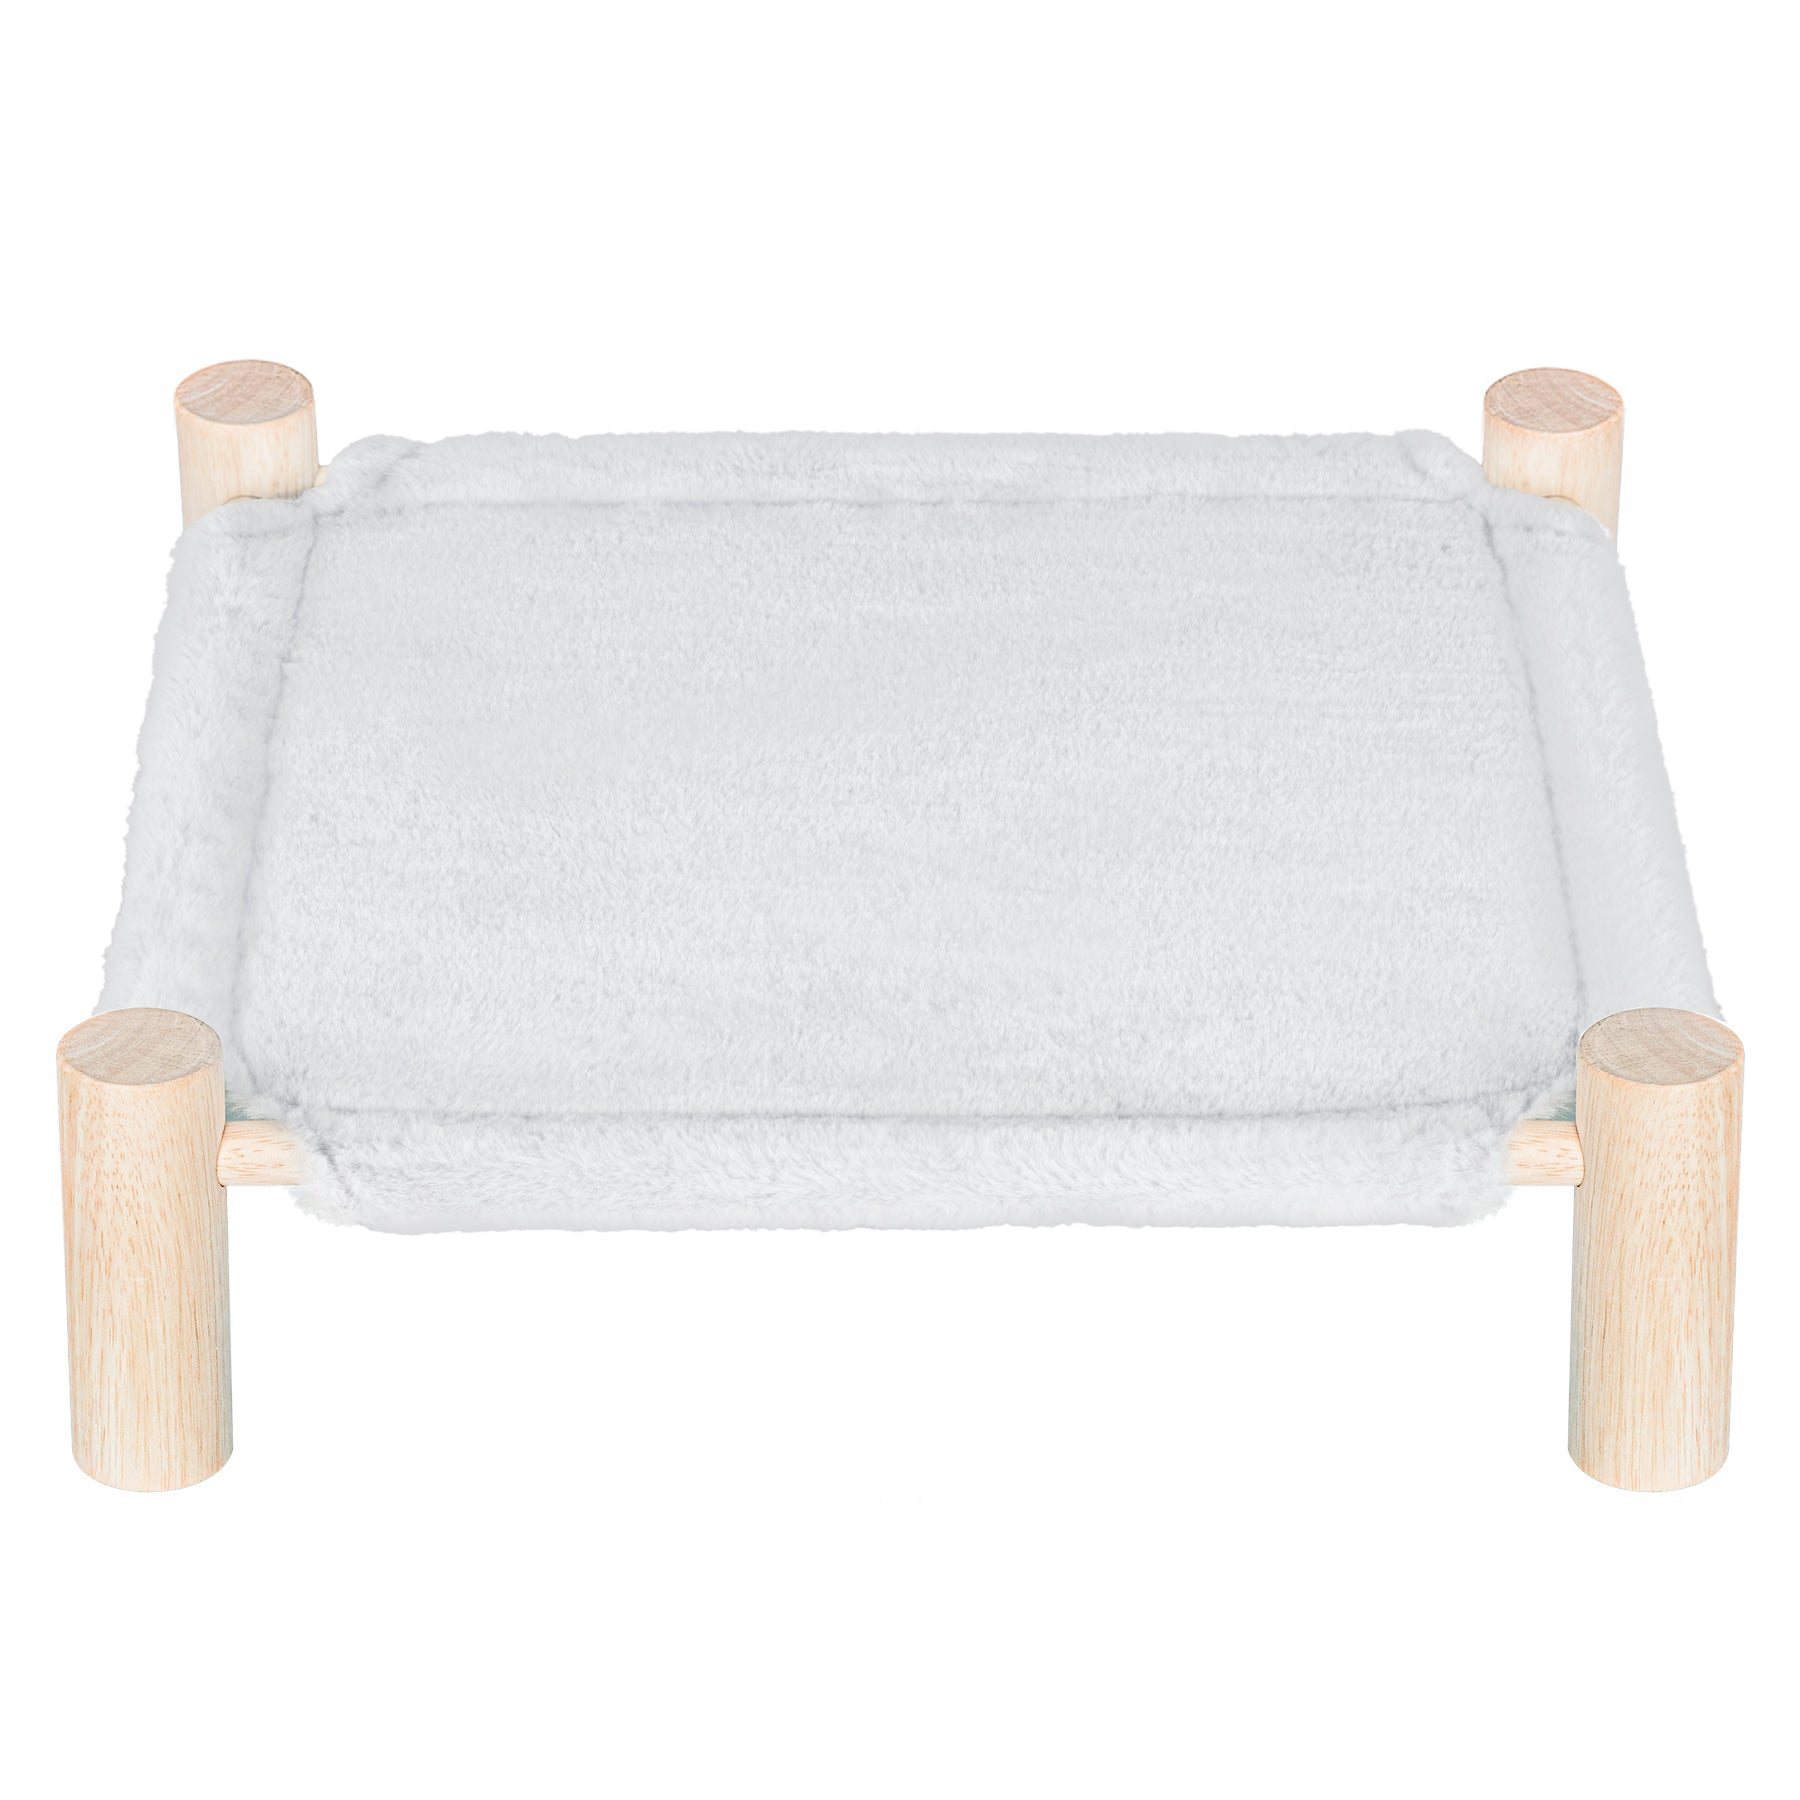 Fluffee Wooden Raised Pet Bed